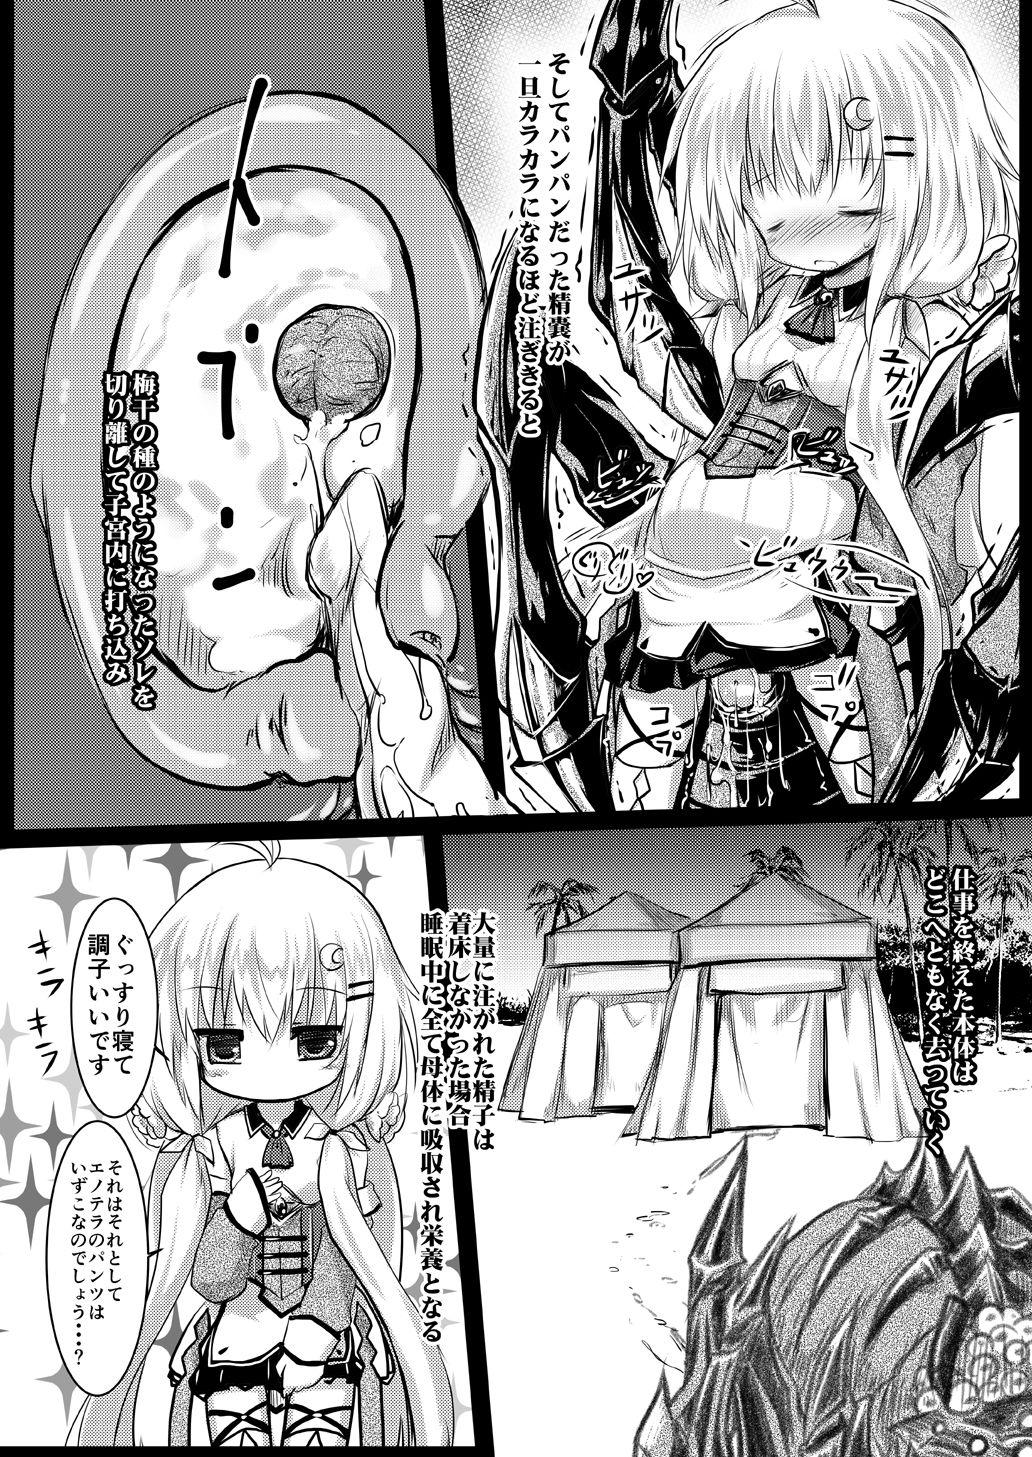 Blowing Gaichuu Higai Houkokusho File 2 - Flower knight girl Step Brother - Page 8